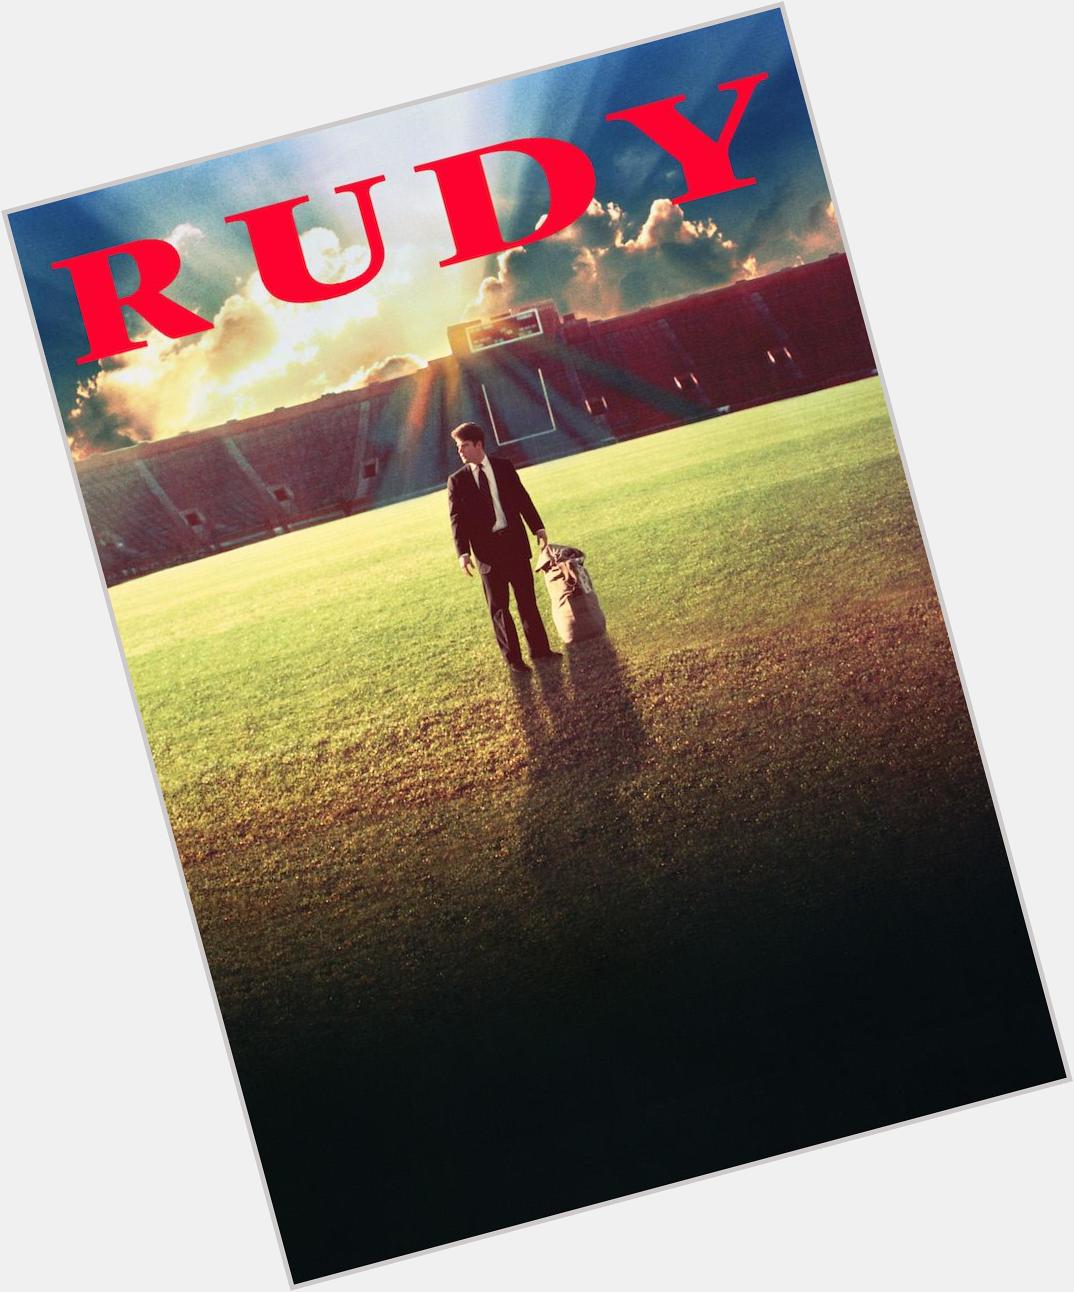 Happy 44th birthday to Sean Astin!

Watch RUDY on Hollywood Suite On Demand.  